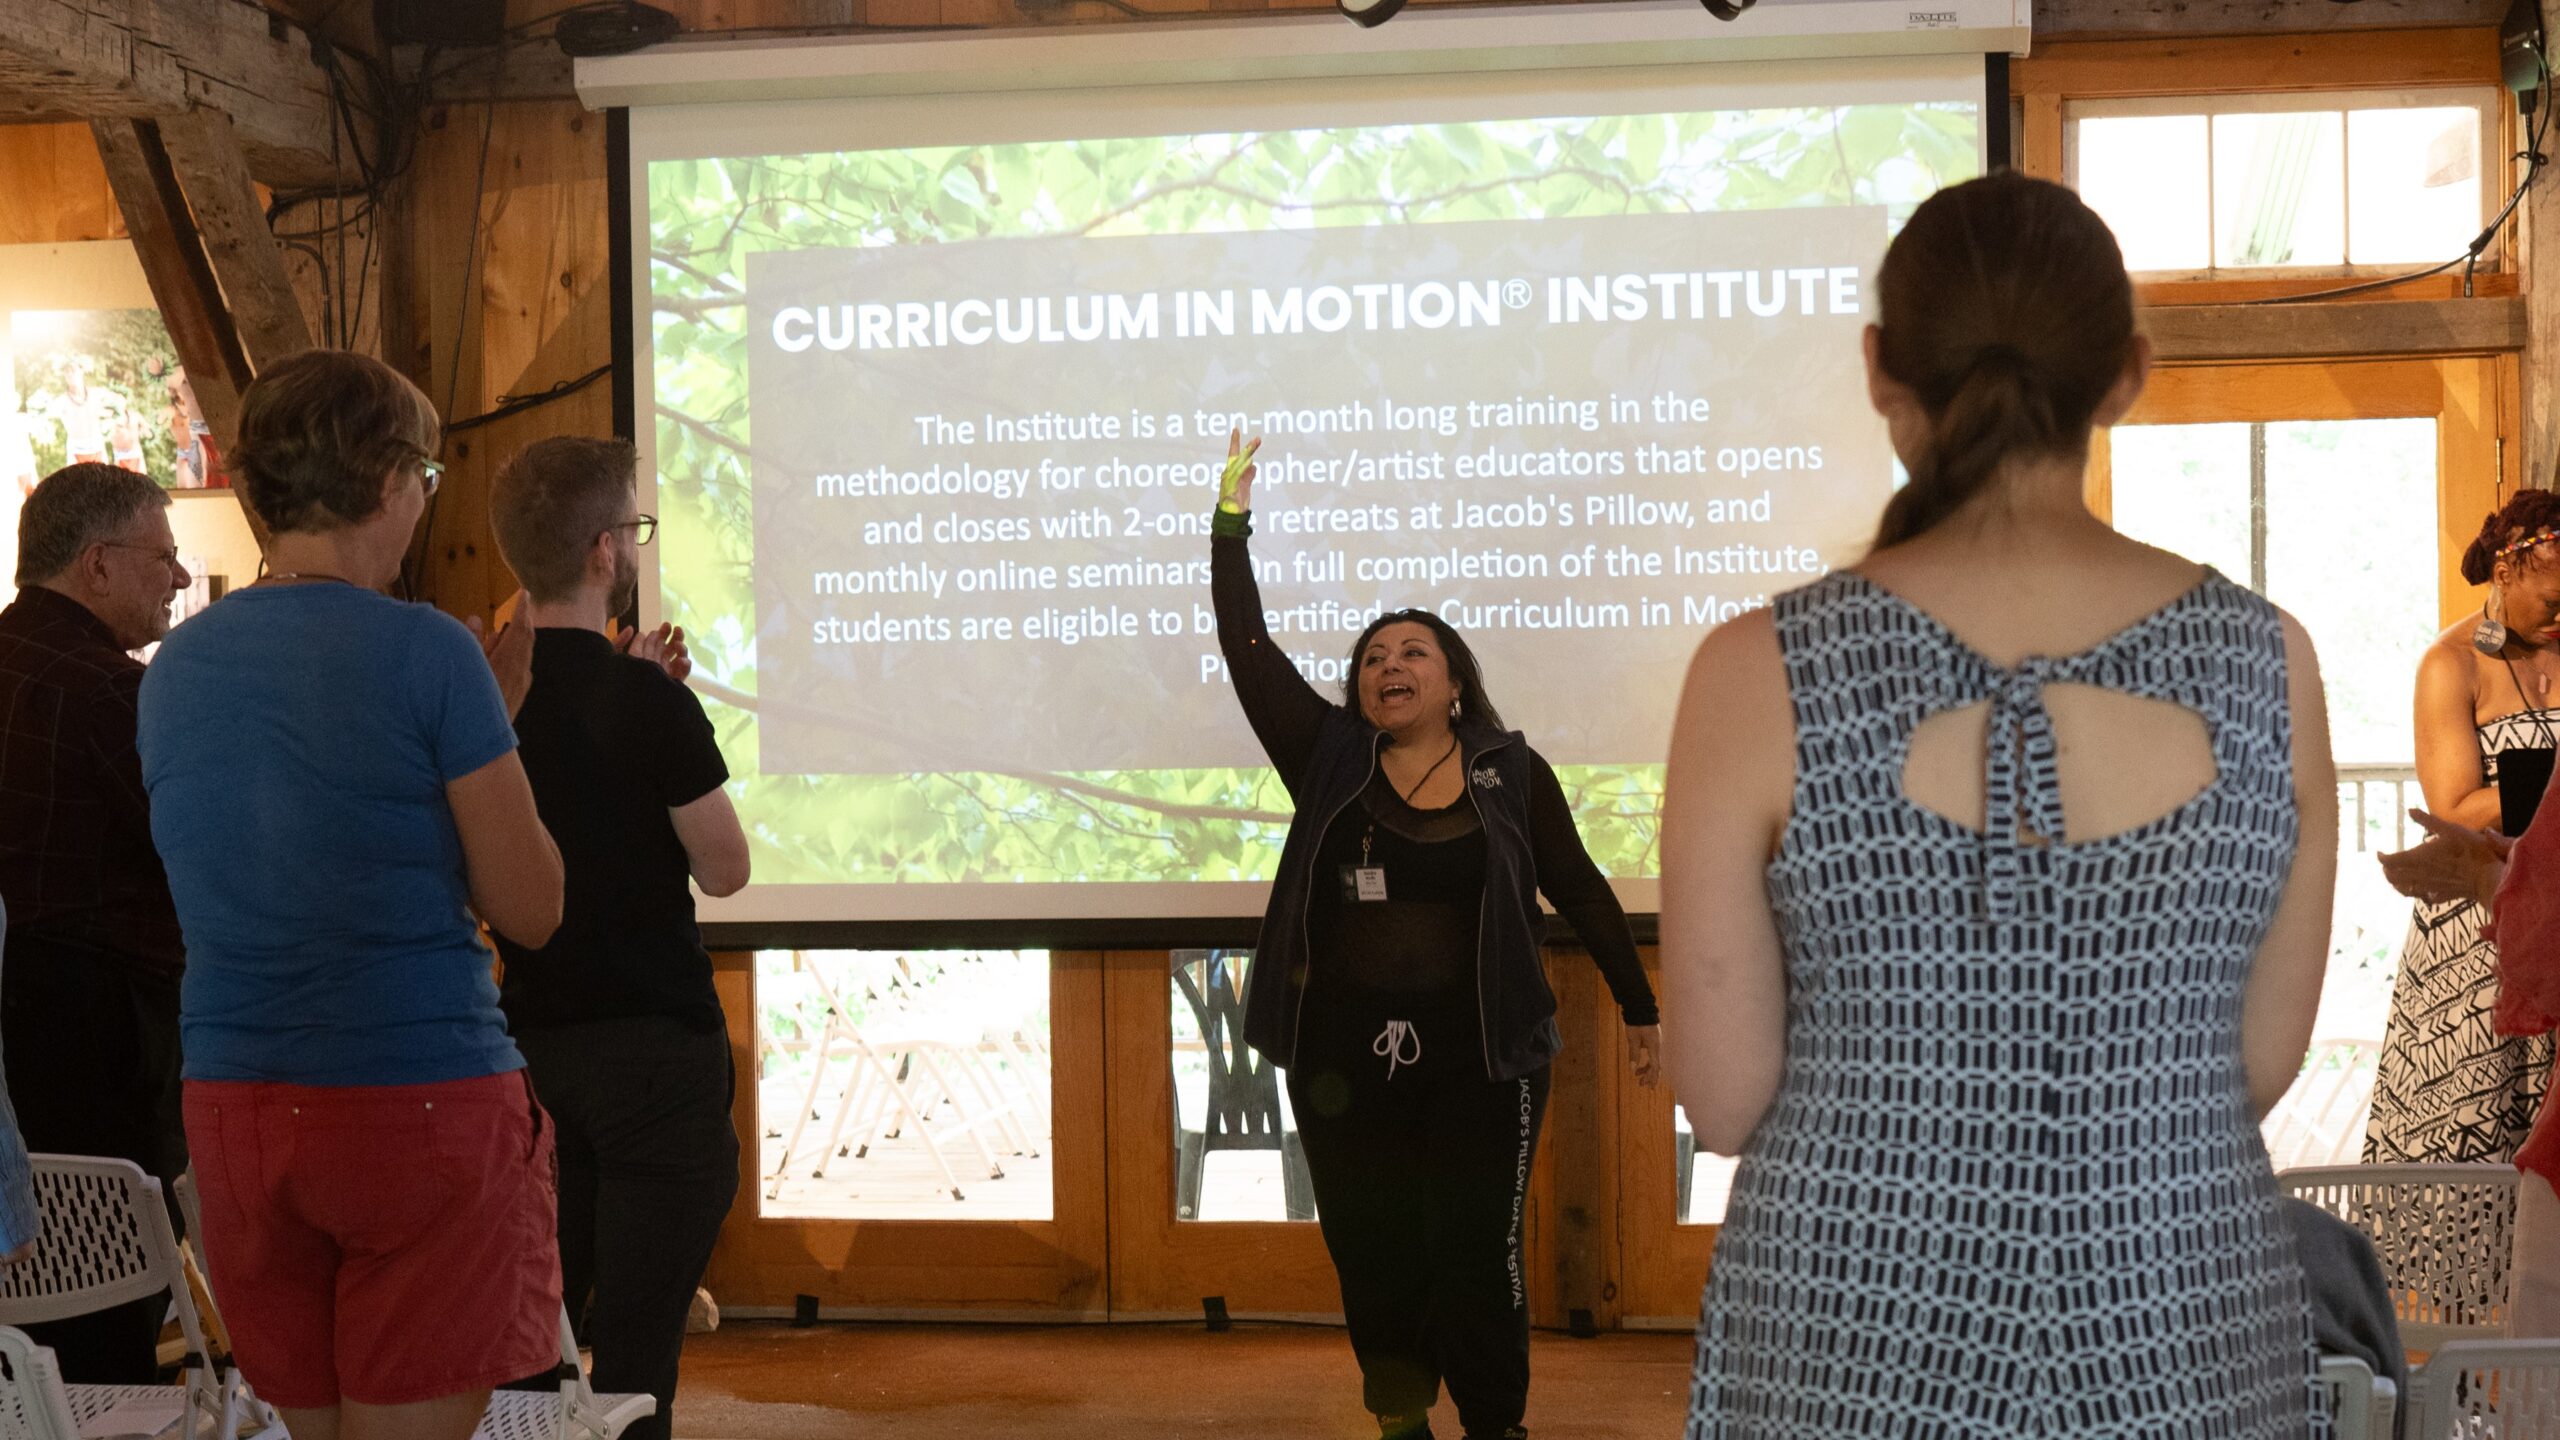 A short woman with dark hair presents to a room of people in front of a screen. The screen is highlighting the Jacob’s Pillow Curriculum in Motion® Institute.